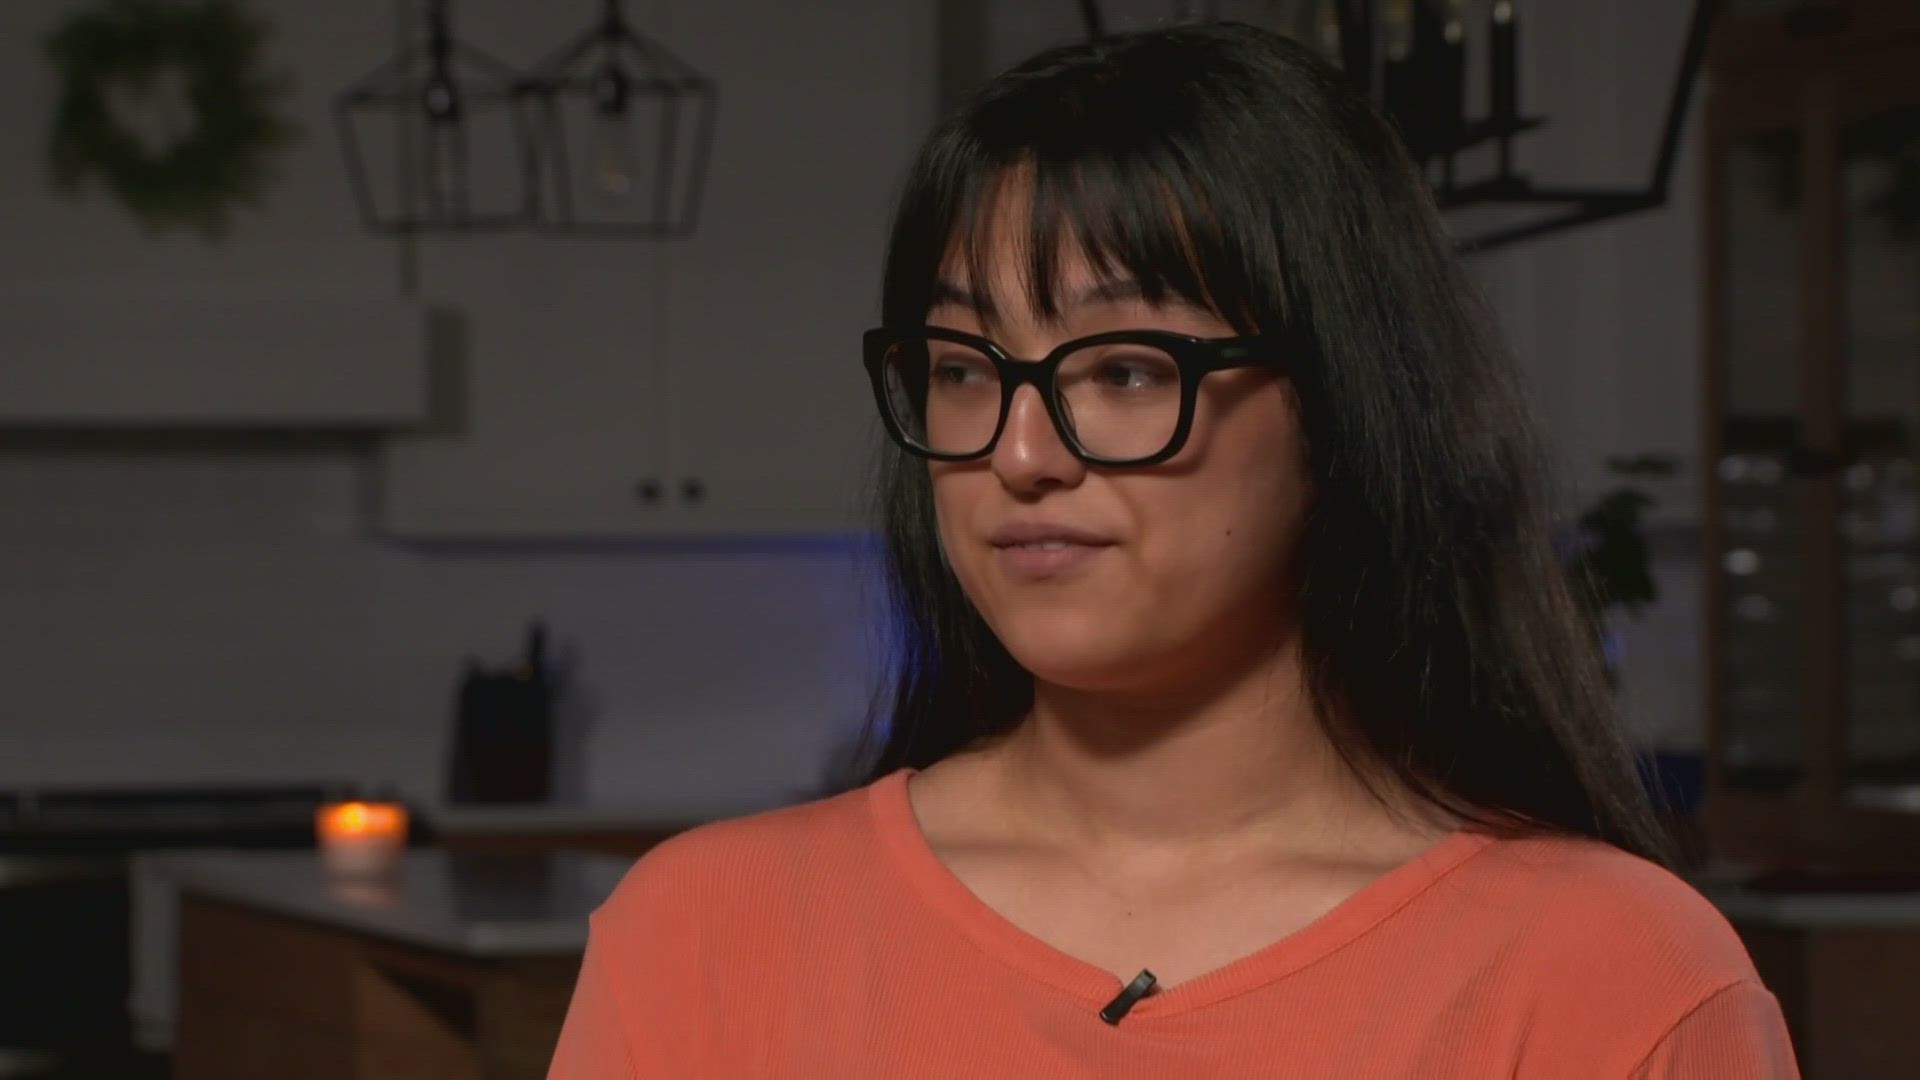 Maya Veliz told WFAA she's worked for four years to end up first in her class.